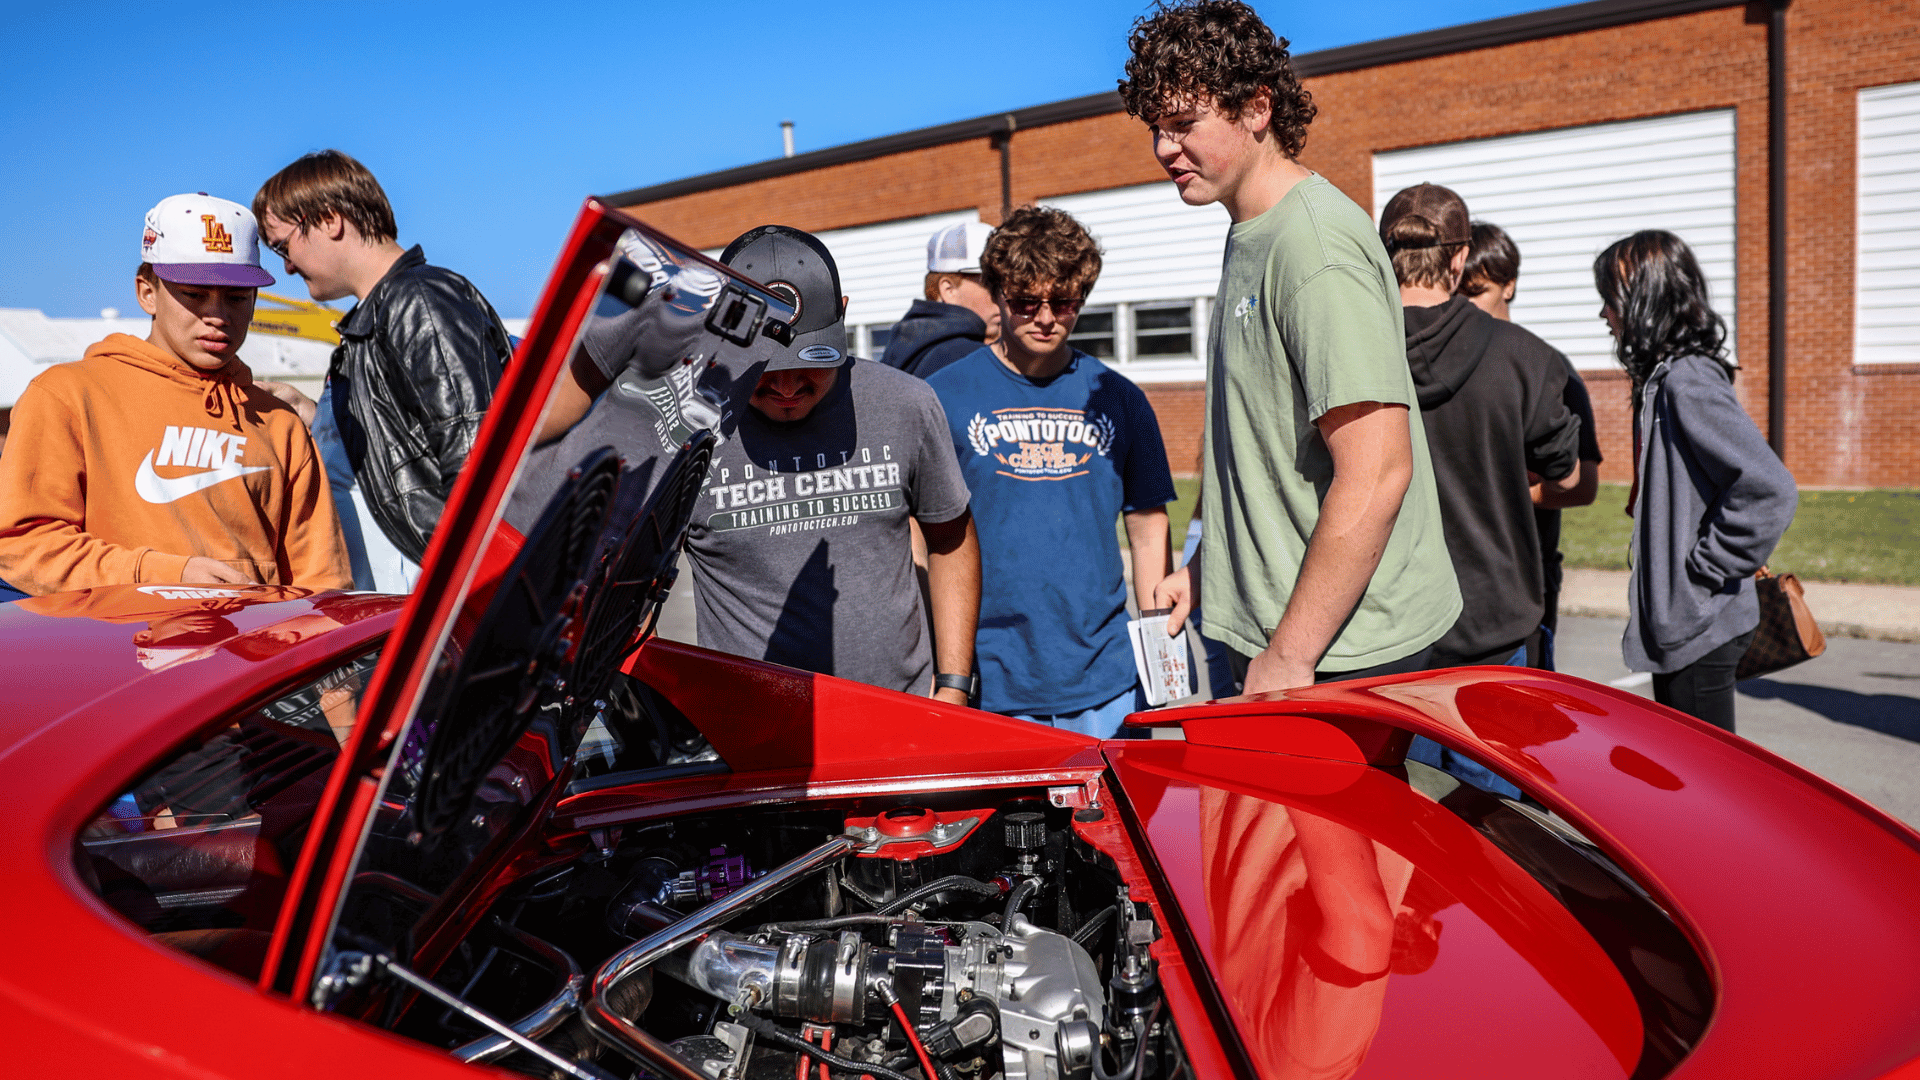 Oklahoma High Schoolers Find New Passion for Technical Education Through Career Encounters